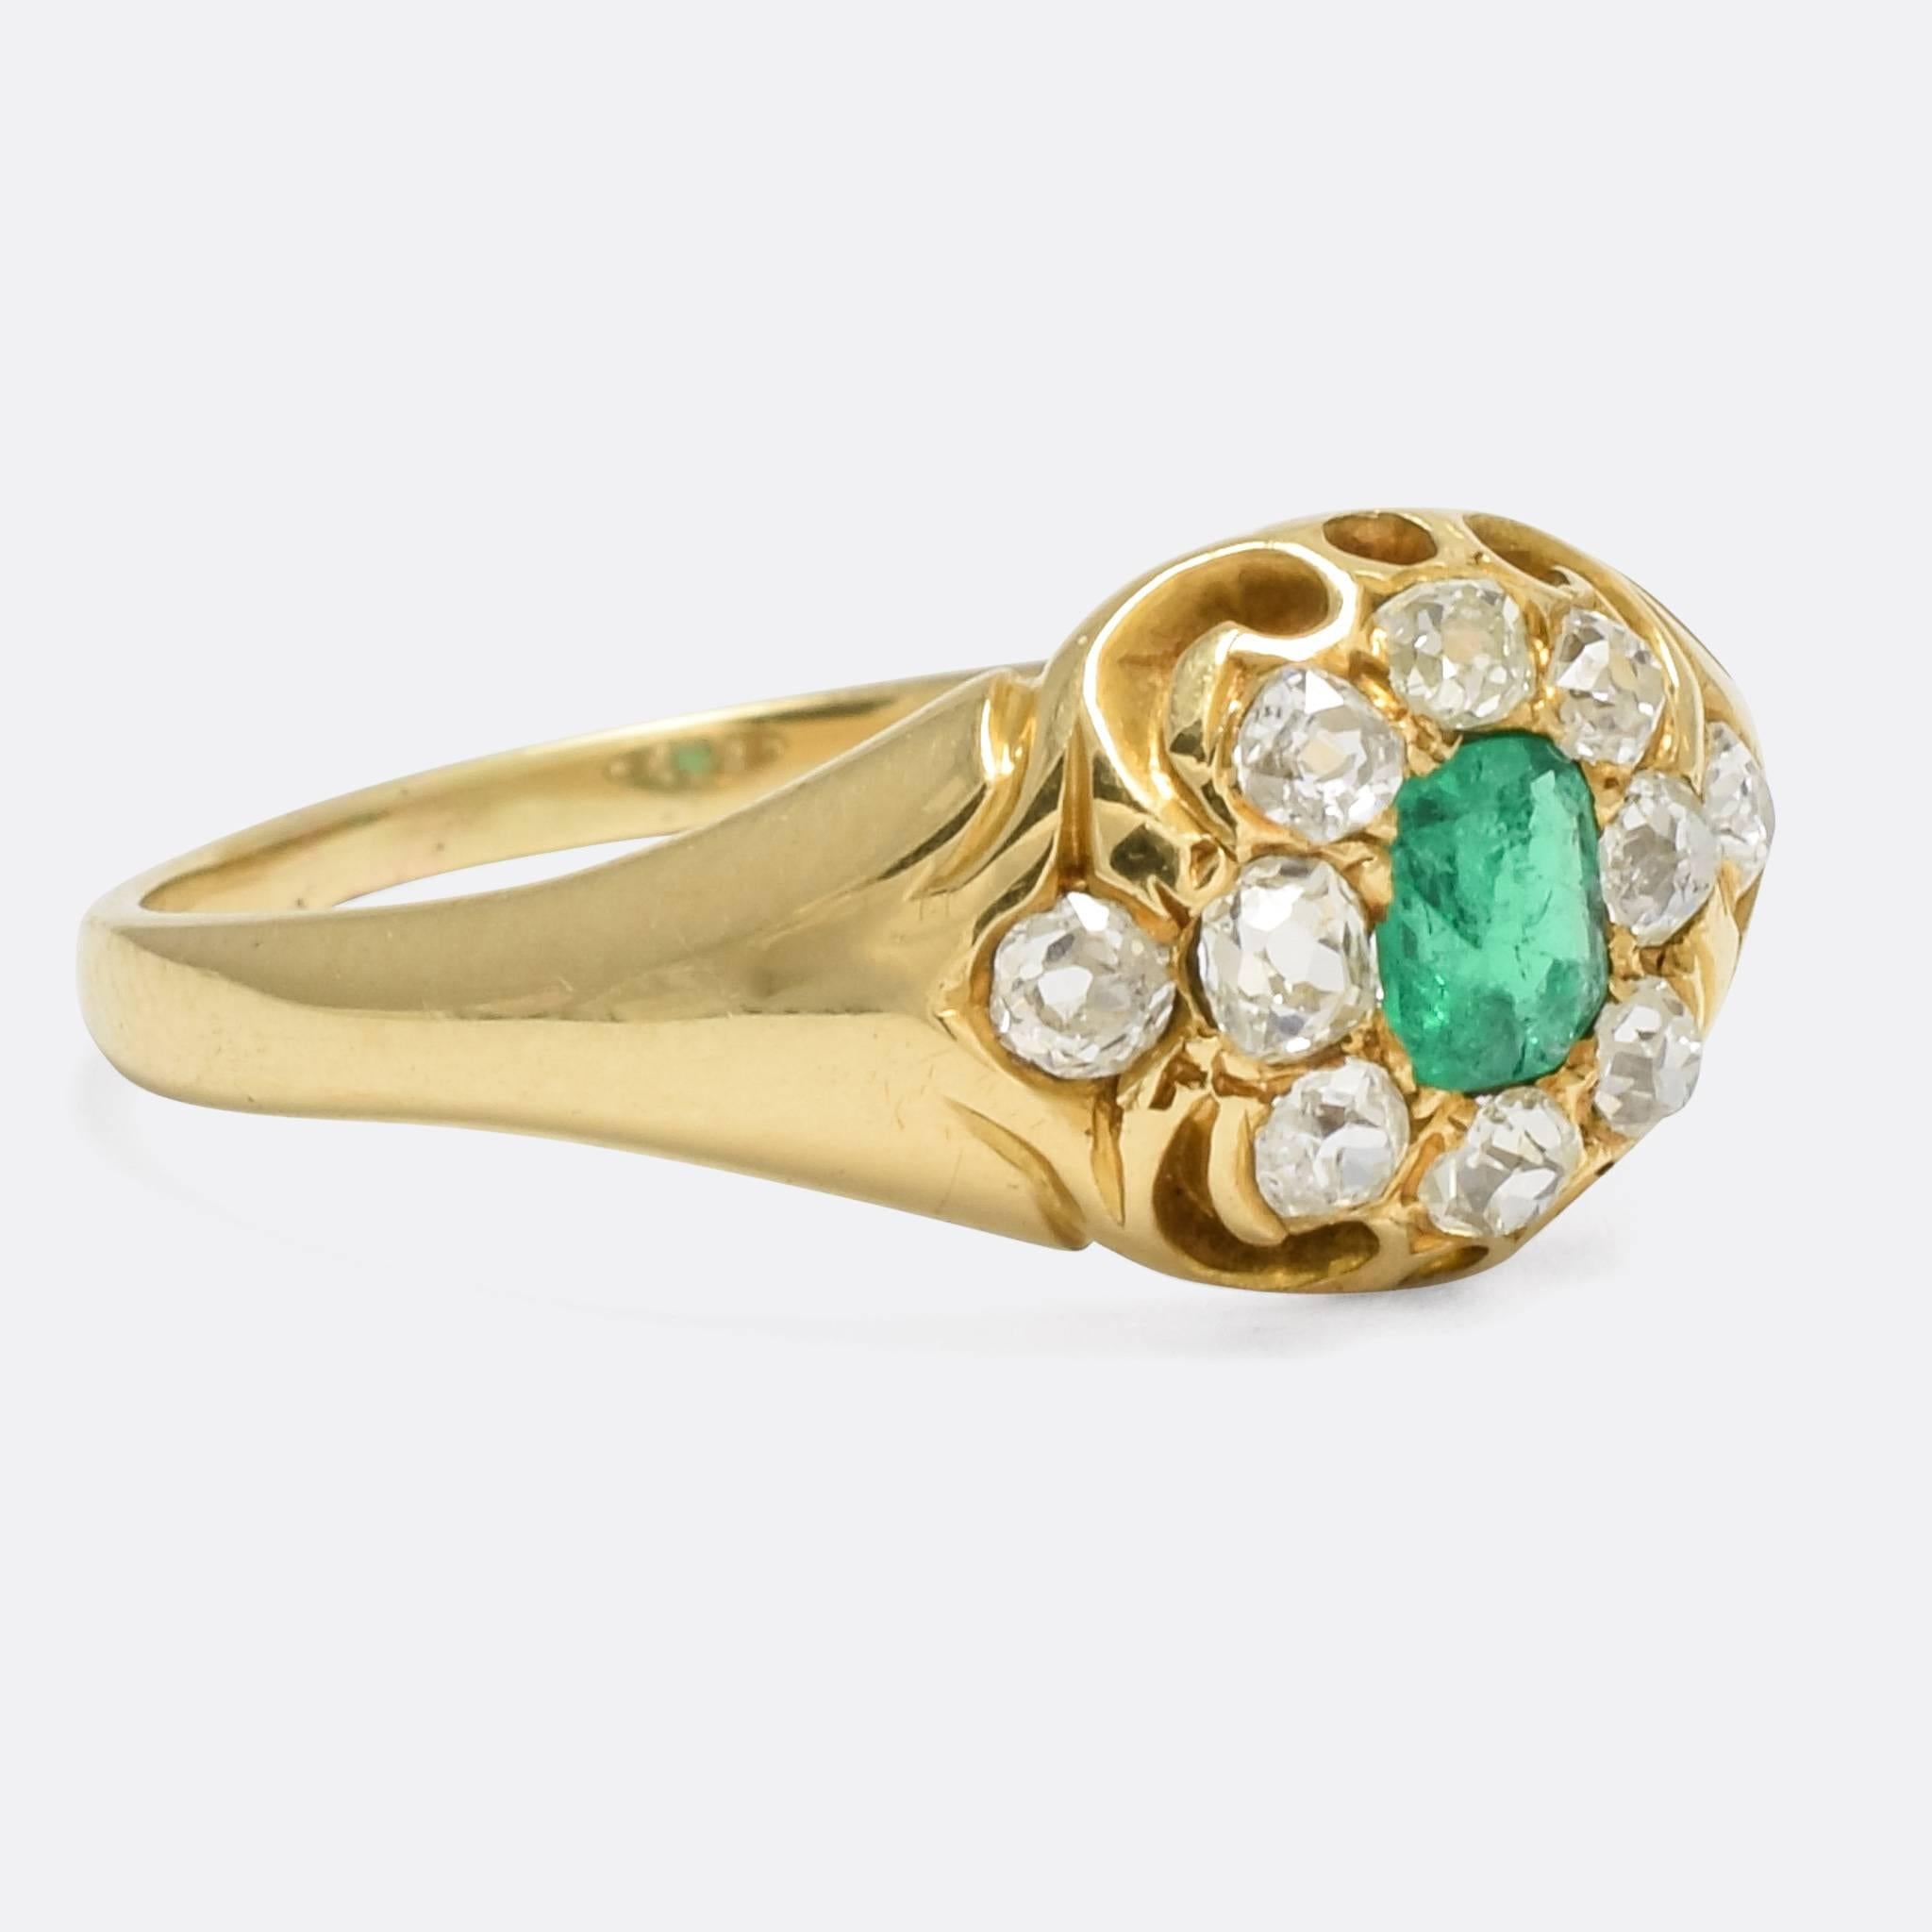 A beautiful antique cluster ring set with a vibrant emerald and ten old mine cut diamonds. The pierced gallery displays chased scroll detailing, and the ring is modelled in 15k gold throughout. A fine piece, the design is very typical of the late